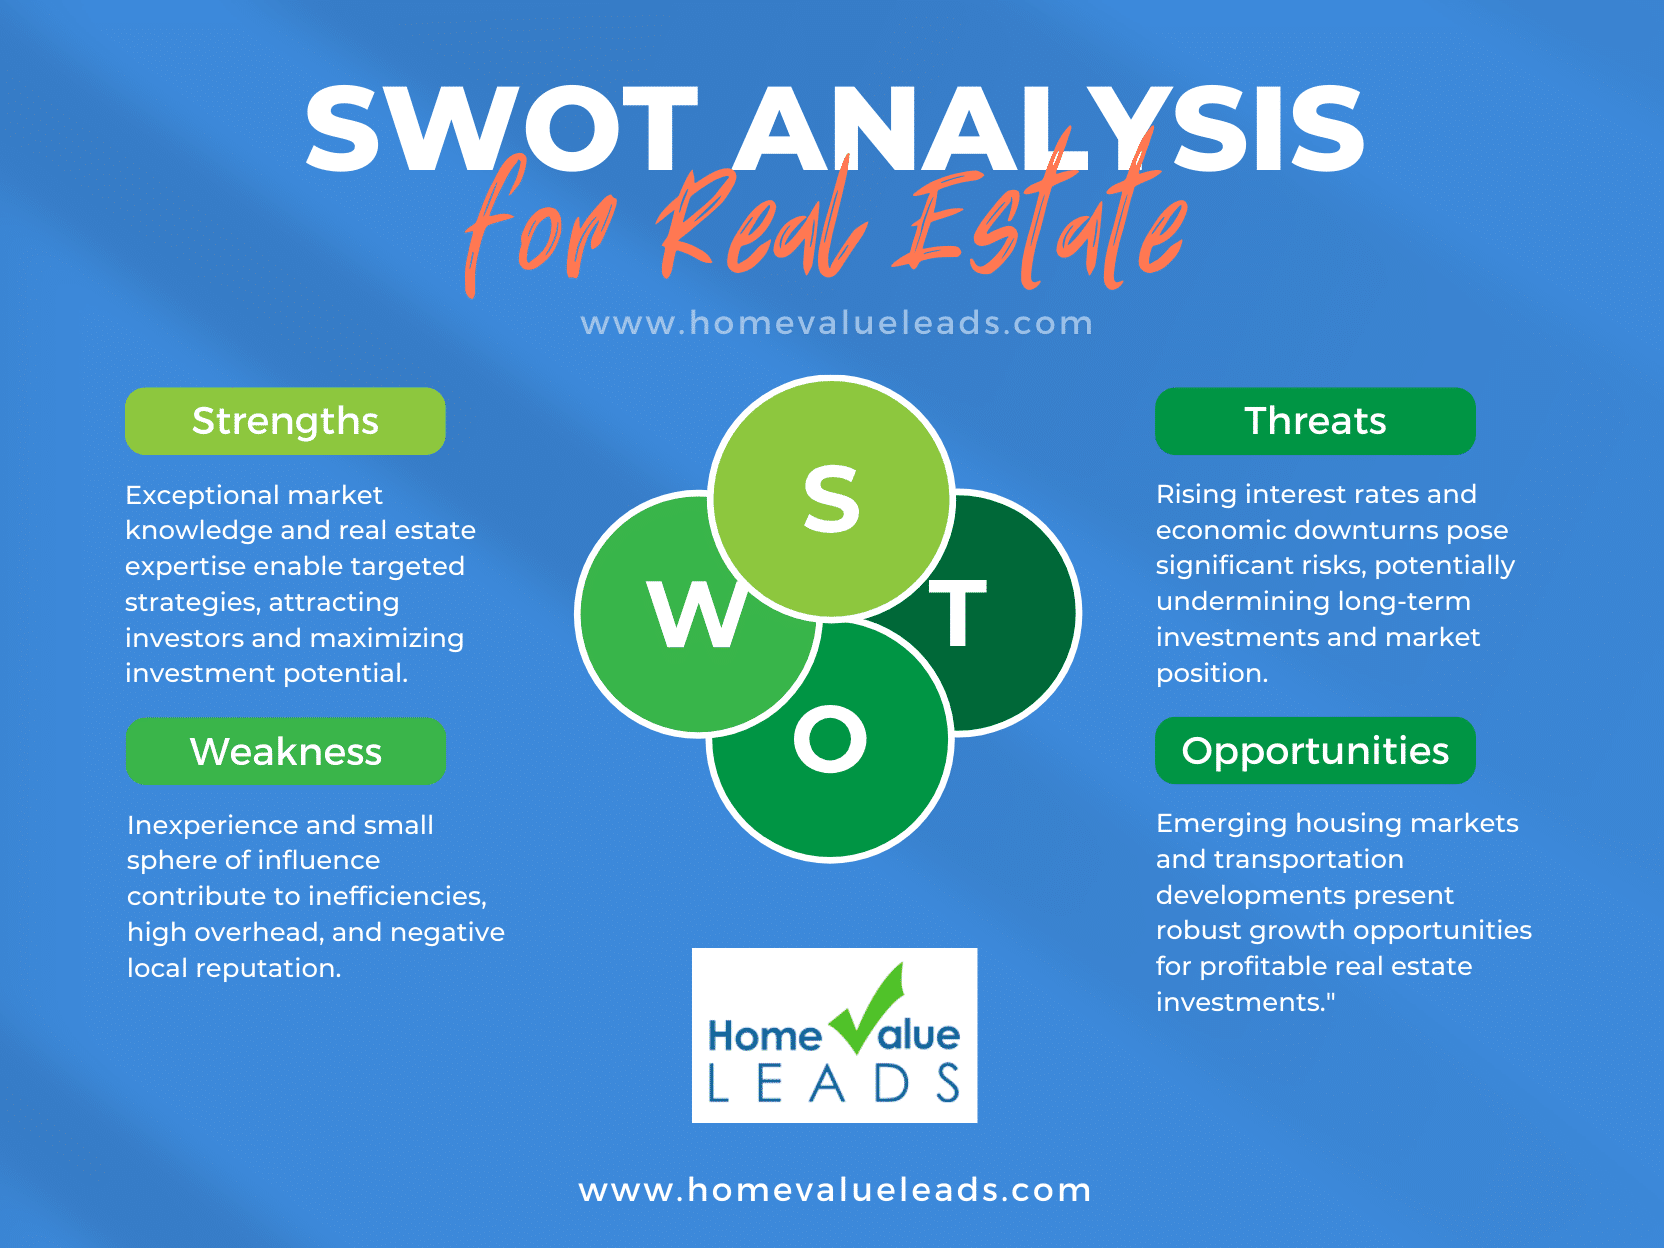 SWOT analysis is pivotal in a real estate marketing plan,Strengths, Weaknesses, Opportunities & Threats